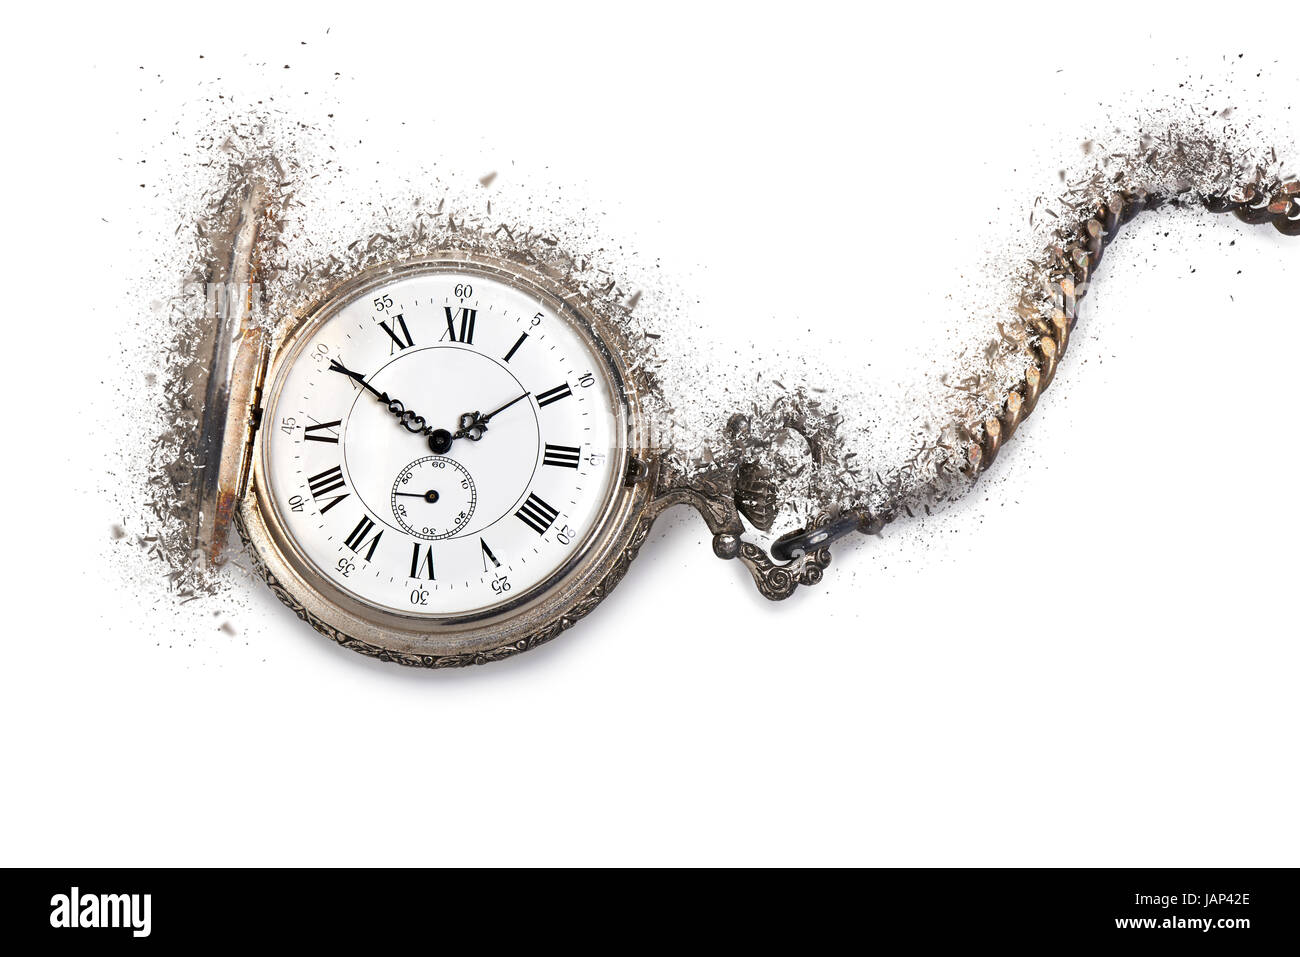 Antique pocket watch exploding, Time countdown concept Stock Photo